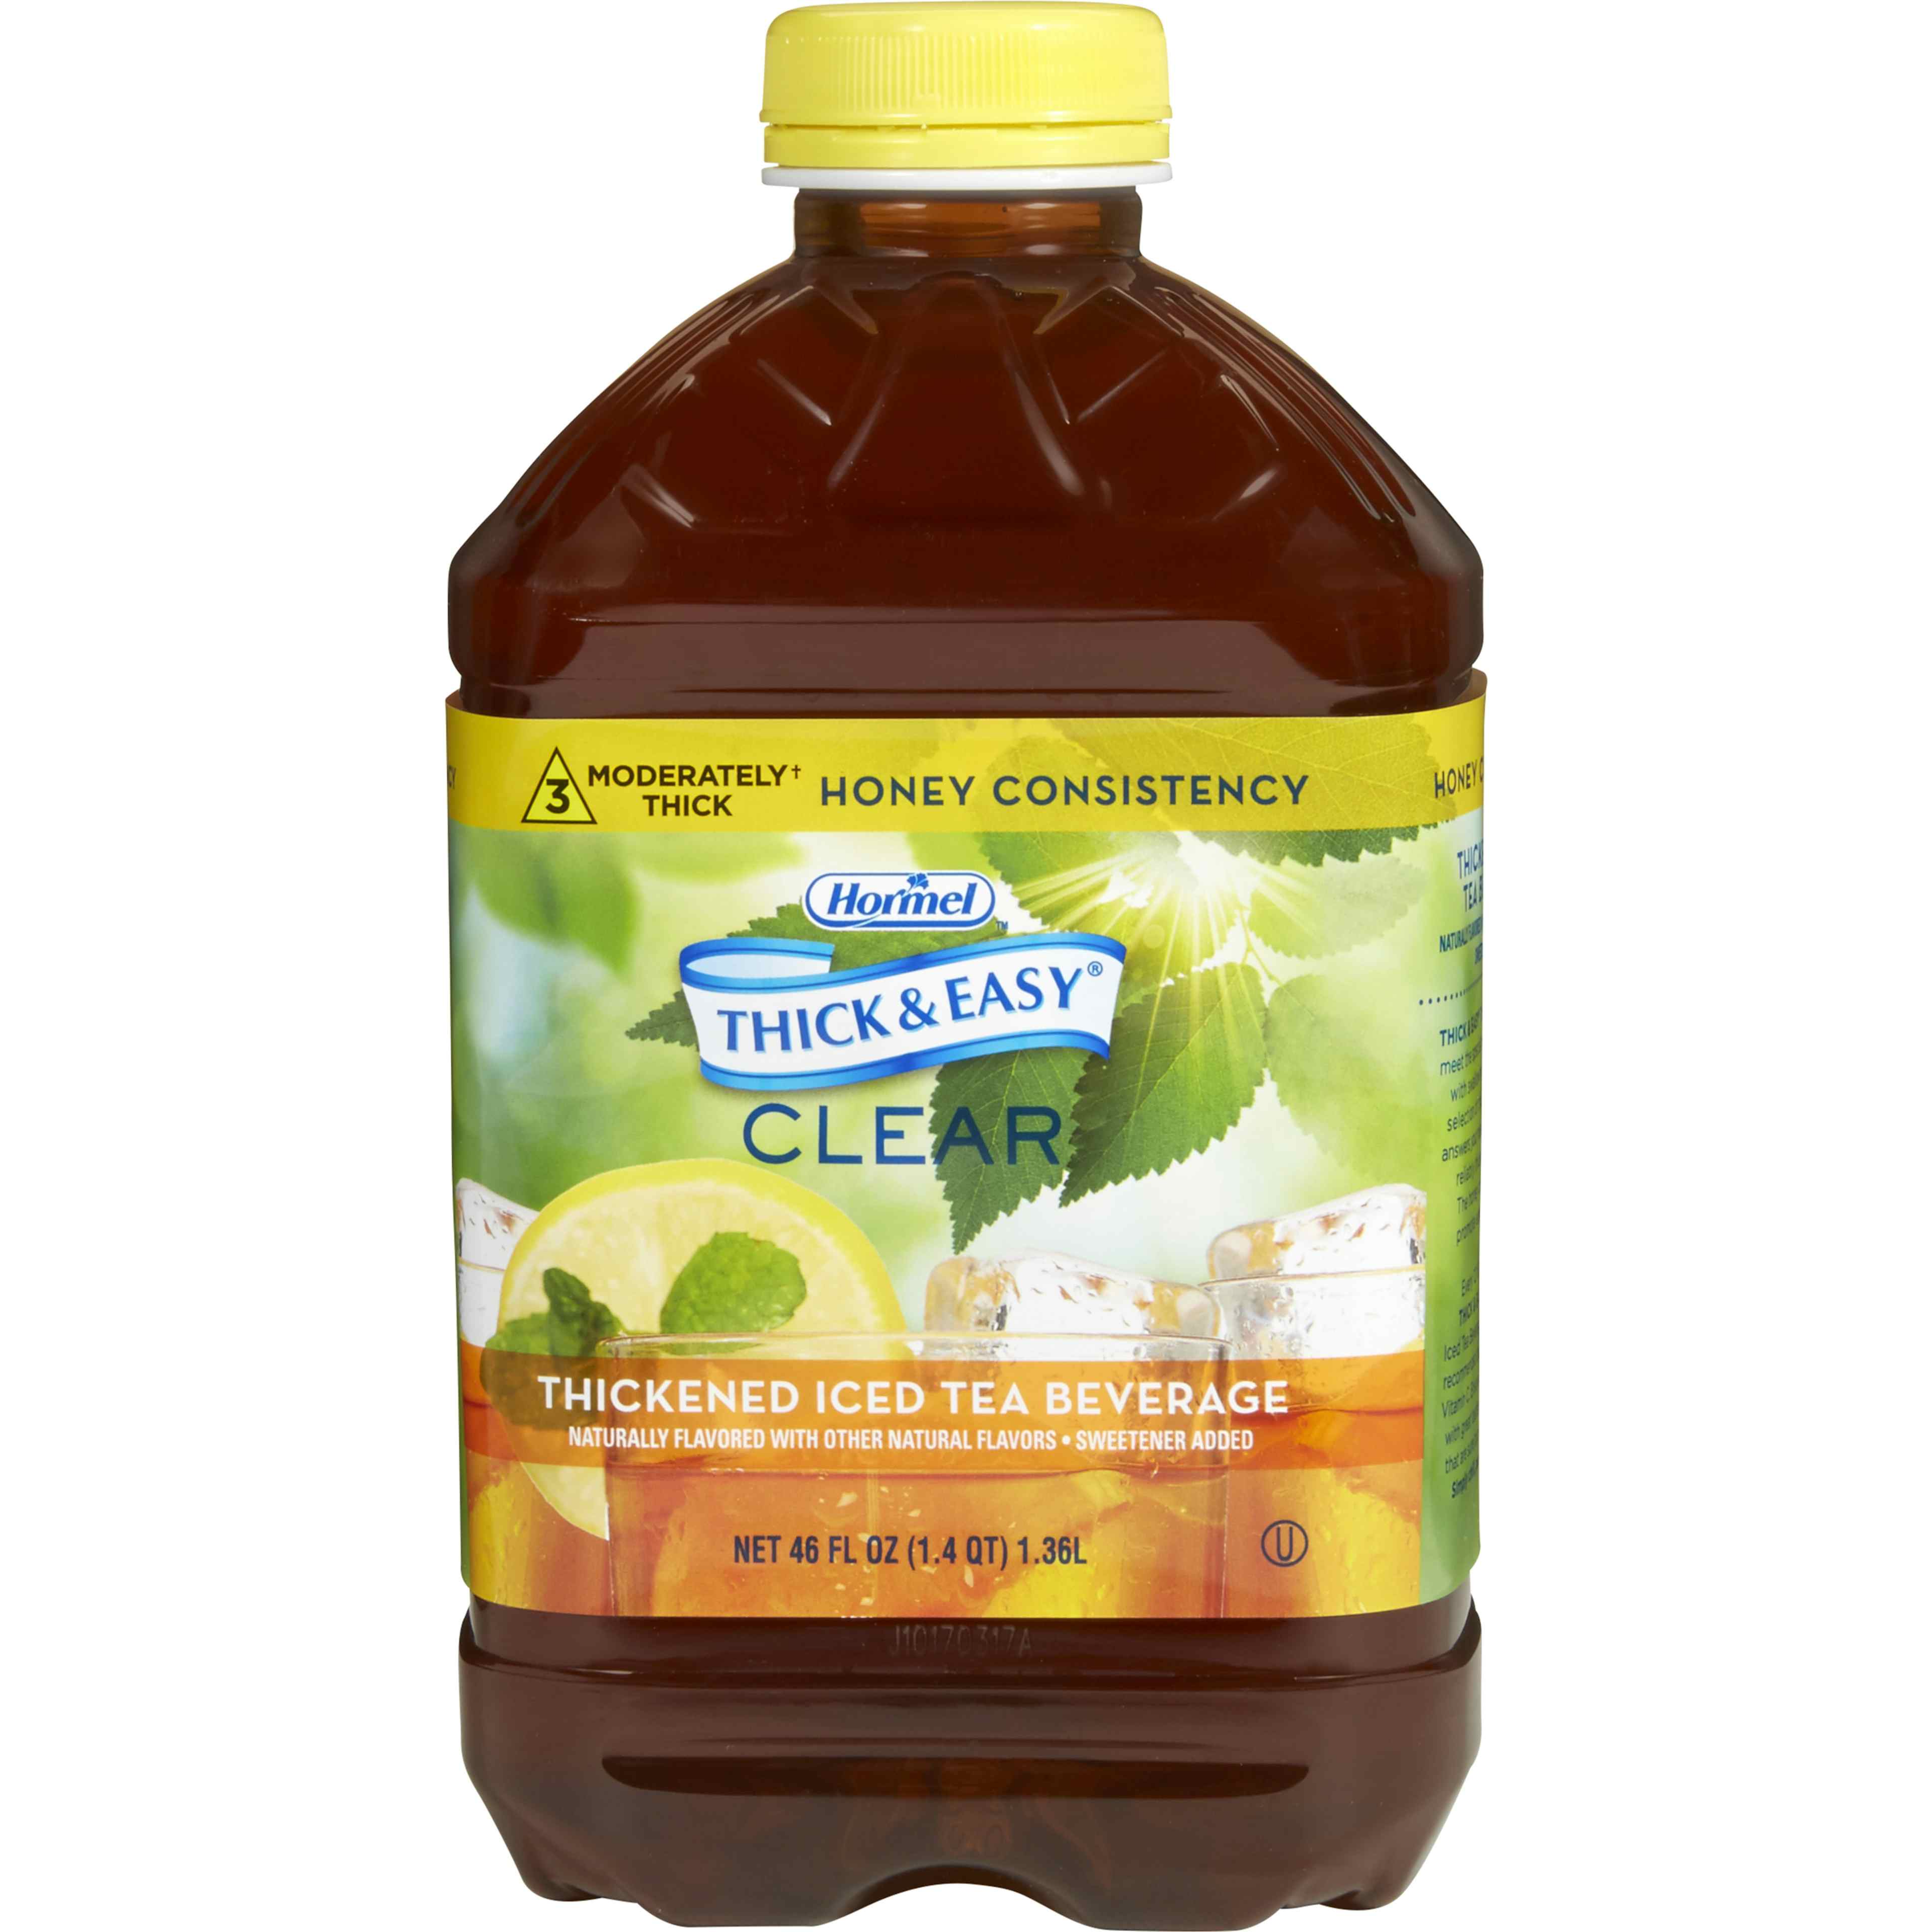 Hormel Thick & Easy Clear Thickened Beverage, Honey Consistency, Moderately Thick, Iced Tea, 46 oz., 45587, 1 Each